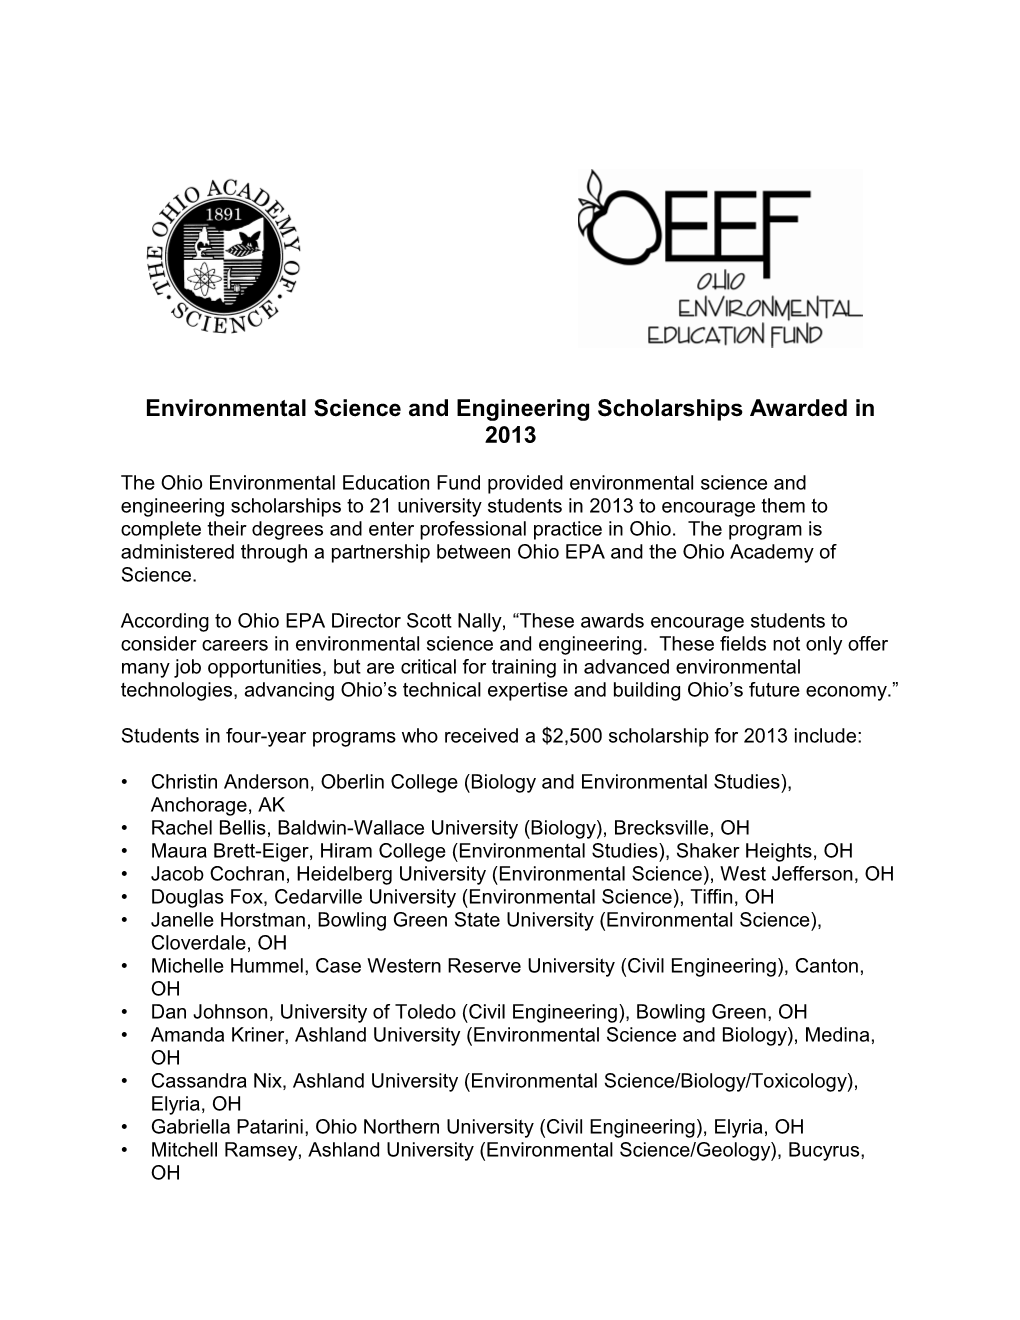 Environmental Science and Engineering Scholarships Awarded in 2013